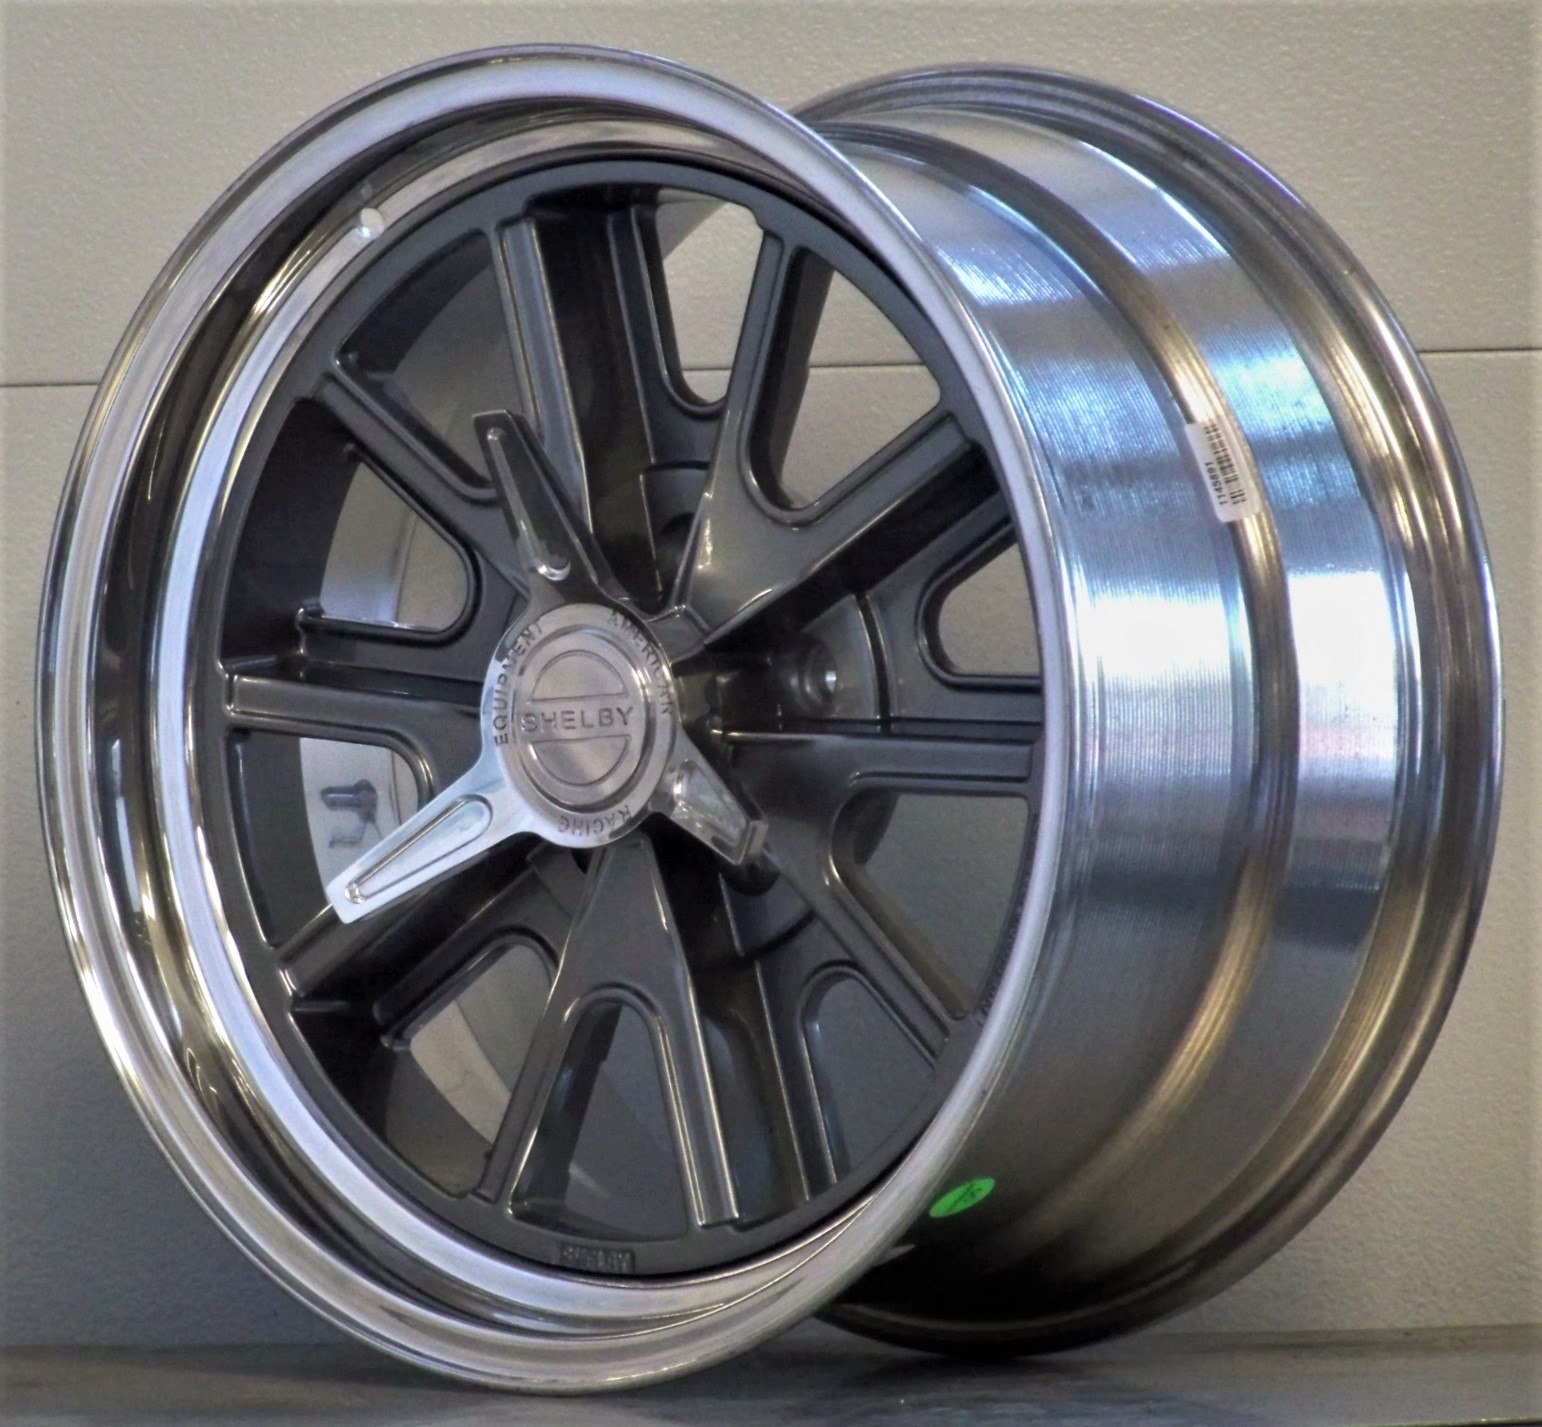 427 Shelby 5 lug gray inc.spinners (price shown per wheel)